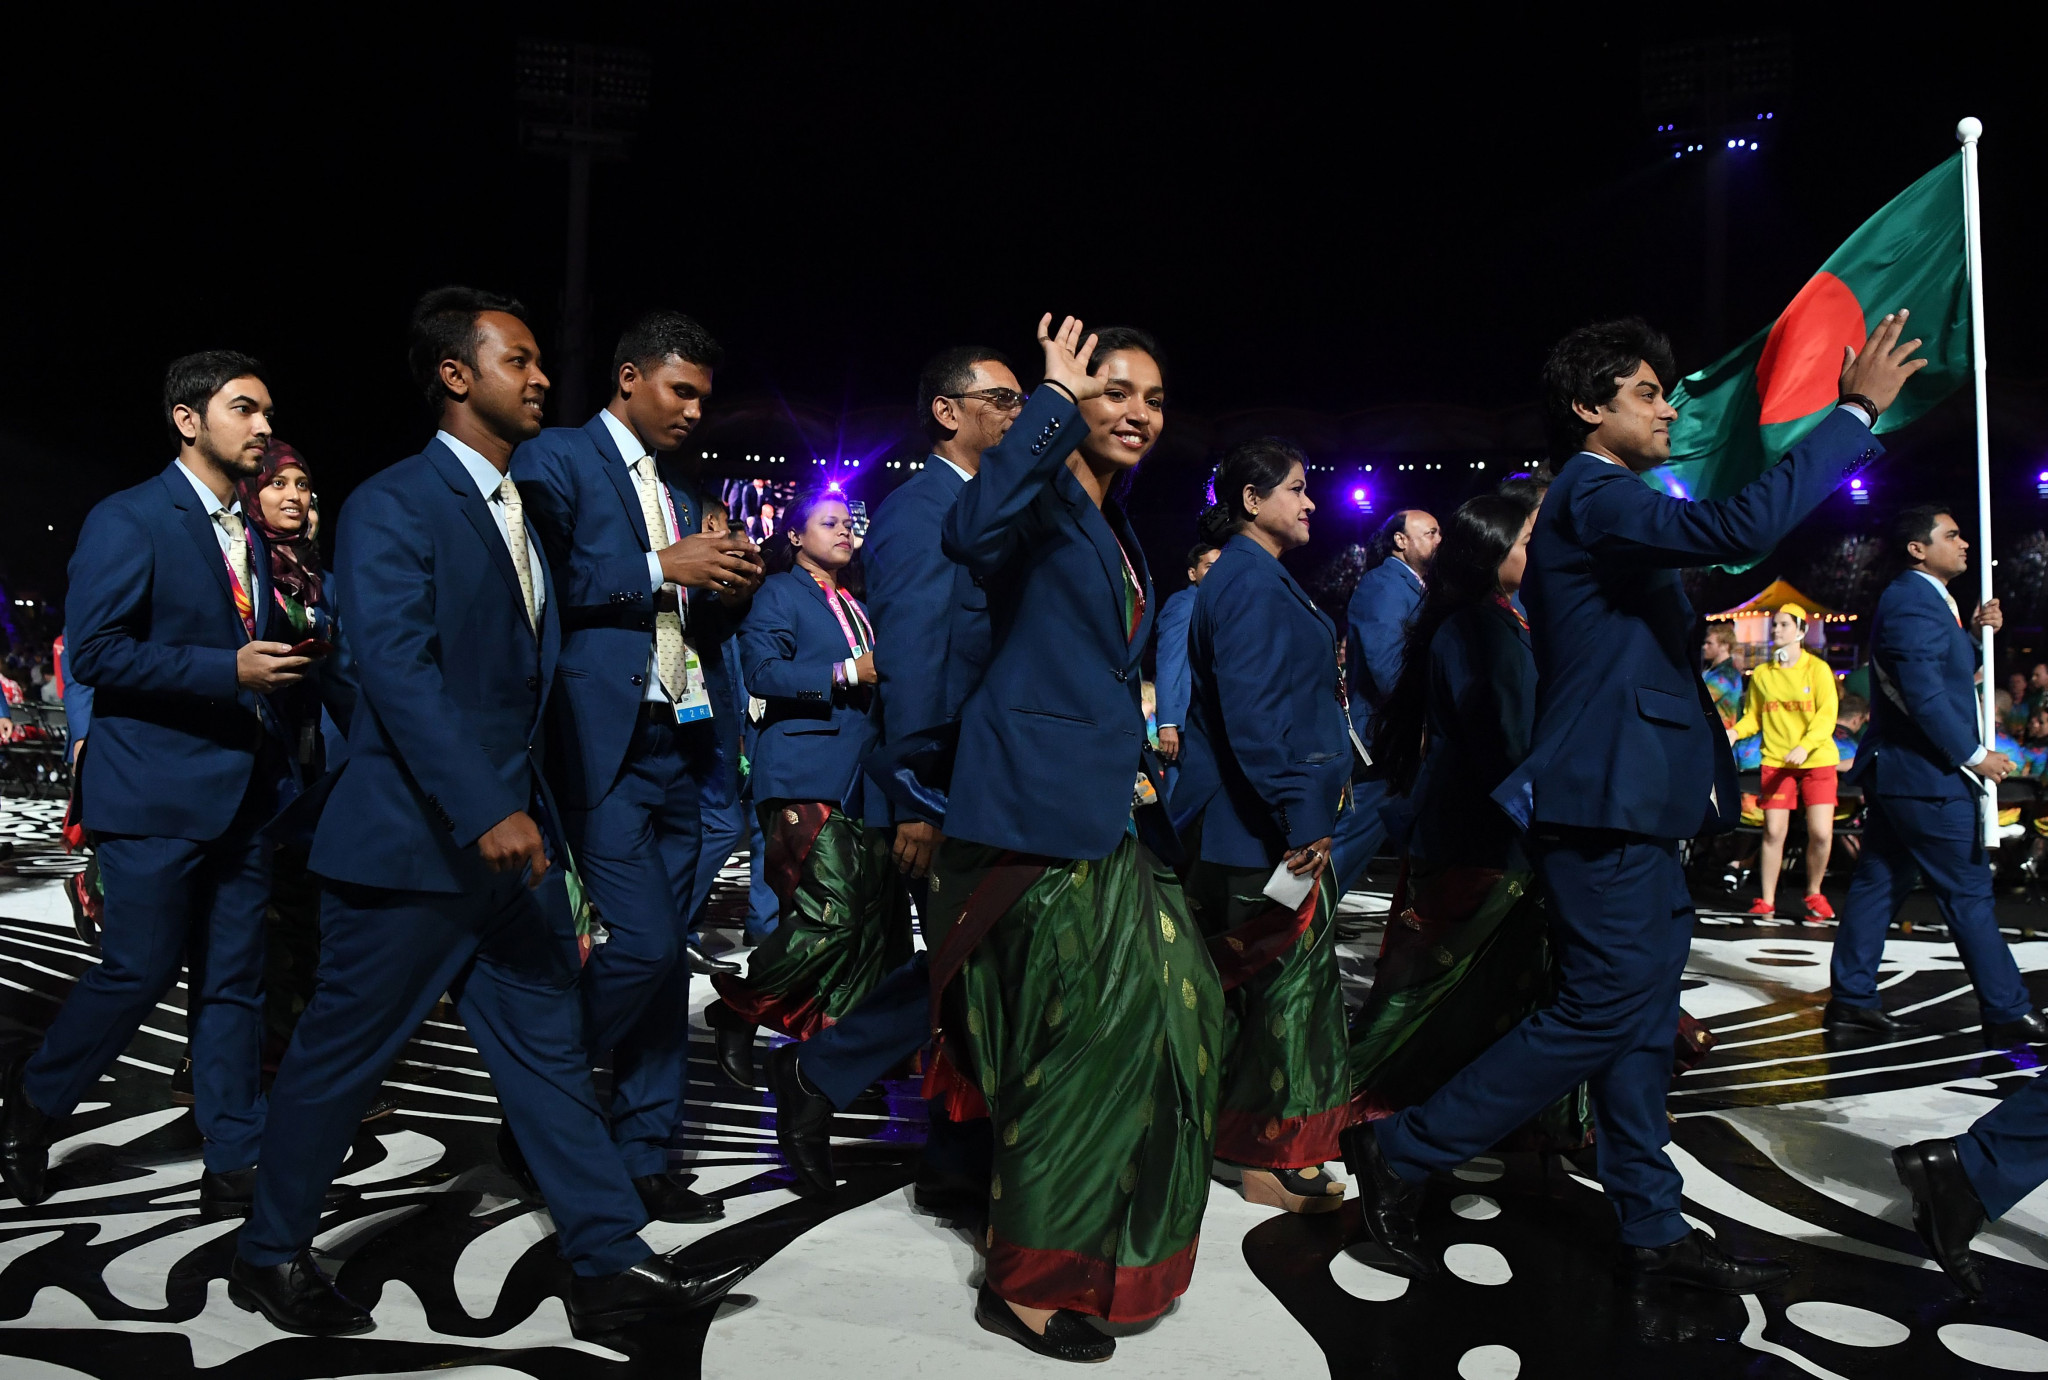 Bangladesh won two medals at Gold Coast 2018 but does not regularly reach the podium ©Getty Images